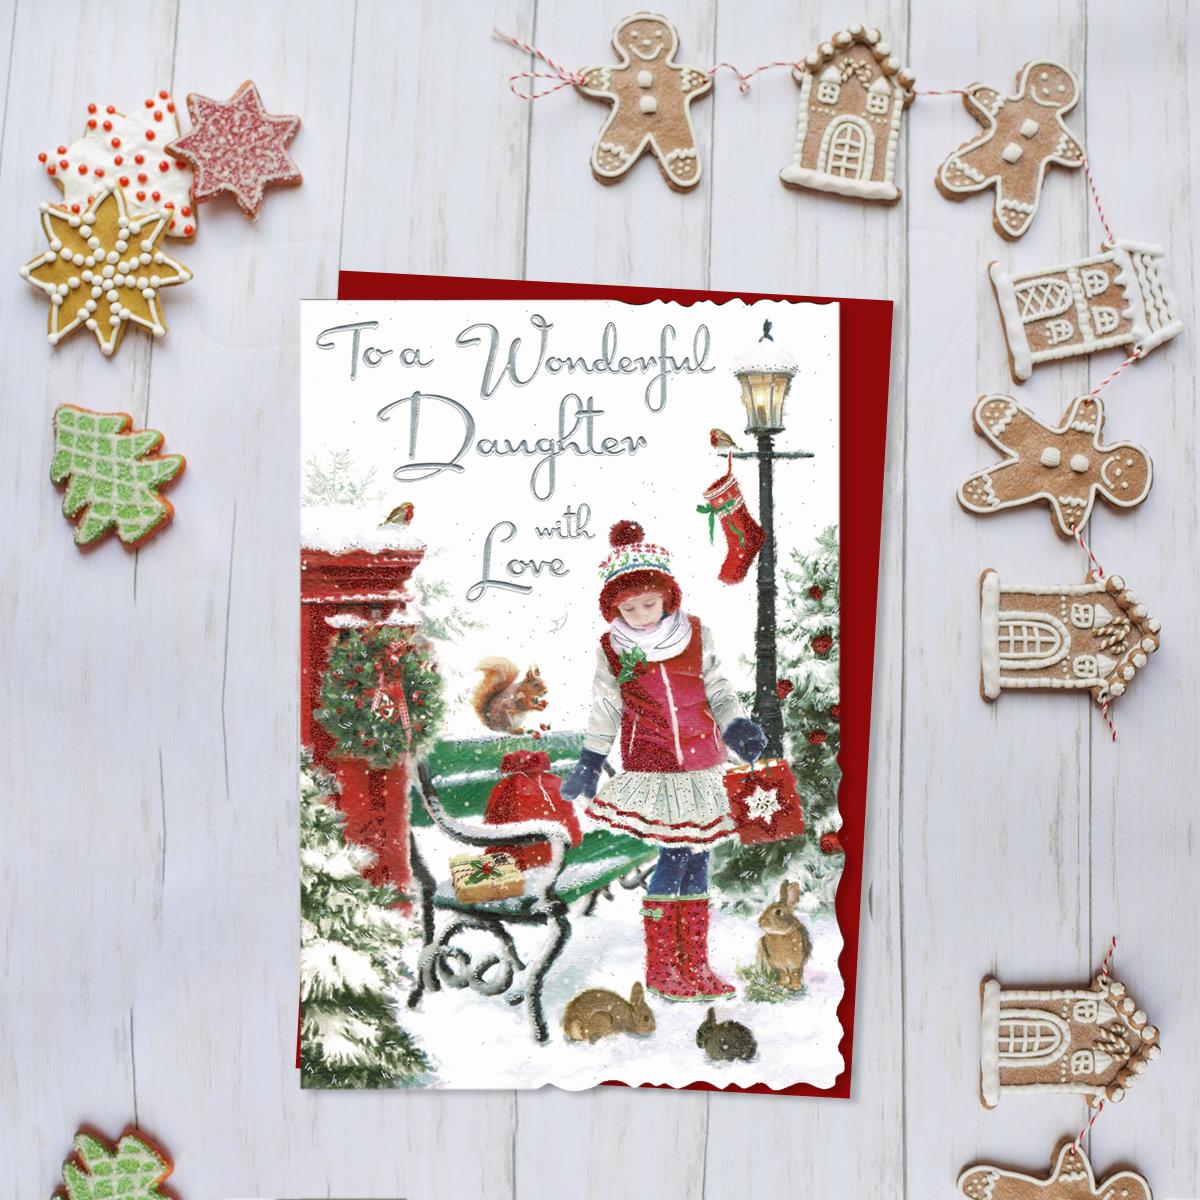 To A Wonderful Daughter With Love Featuring A Girl Surrounded By Woodland Animals In The Snow. Finished With Silver Foiled Lettering, Red Glitter Detail And Red Envelope